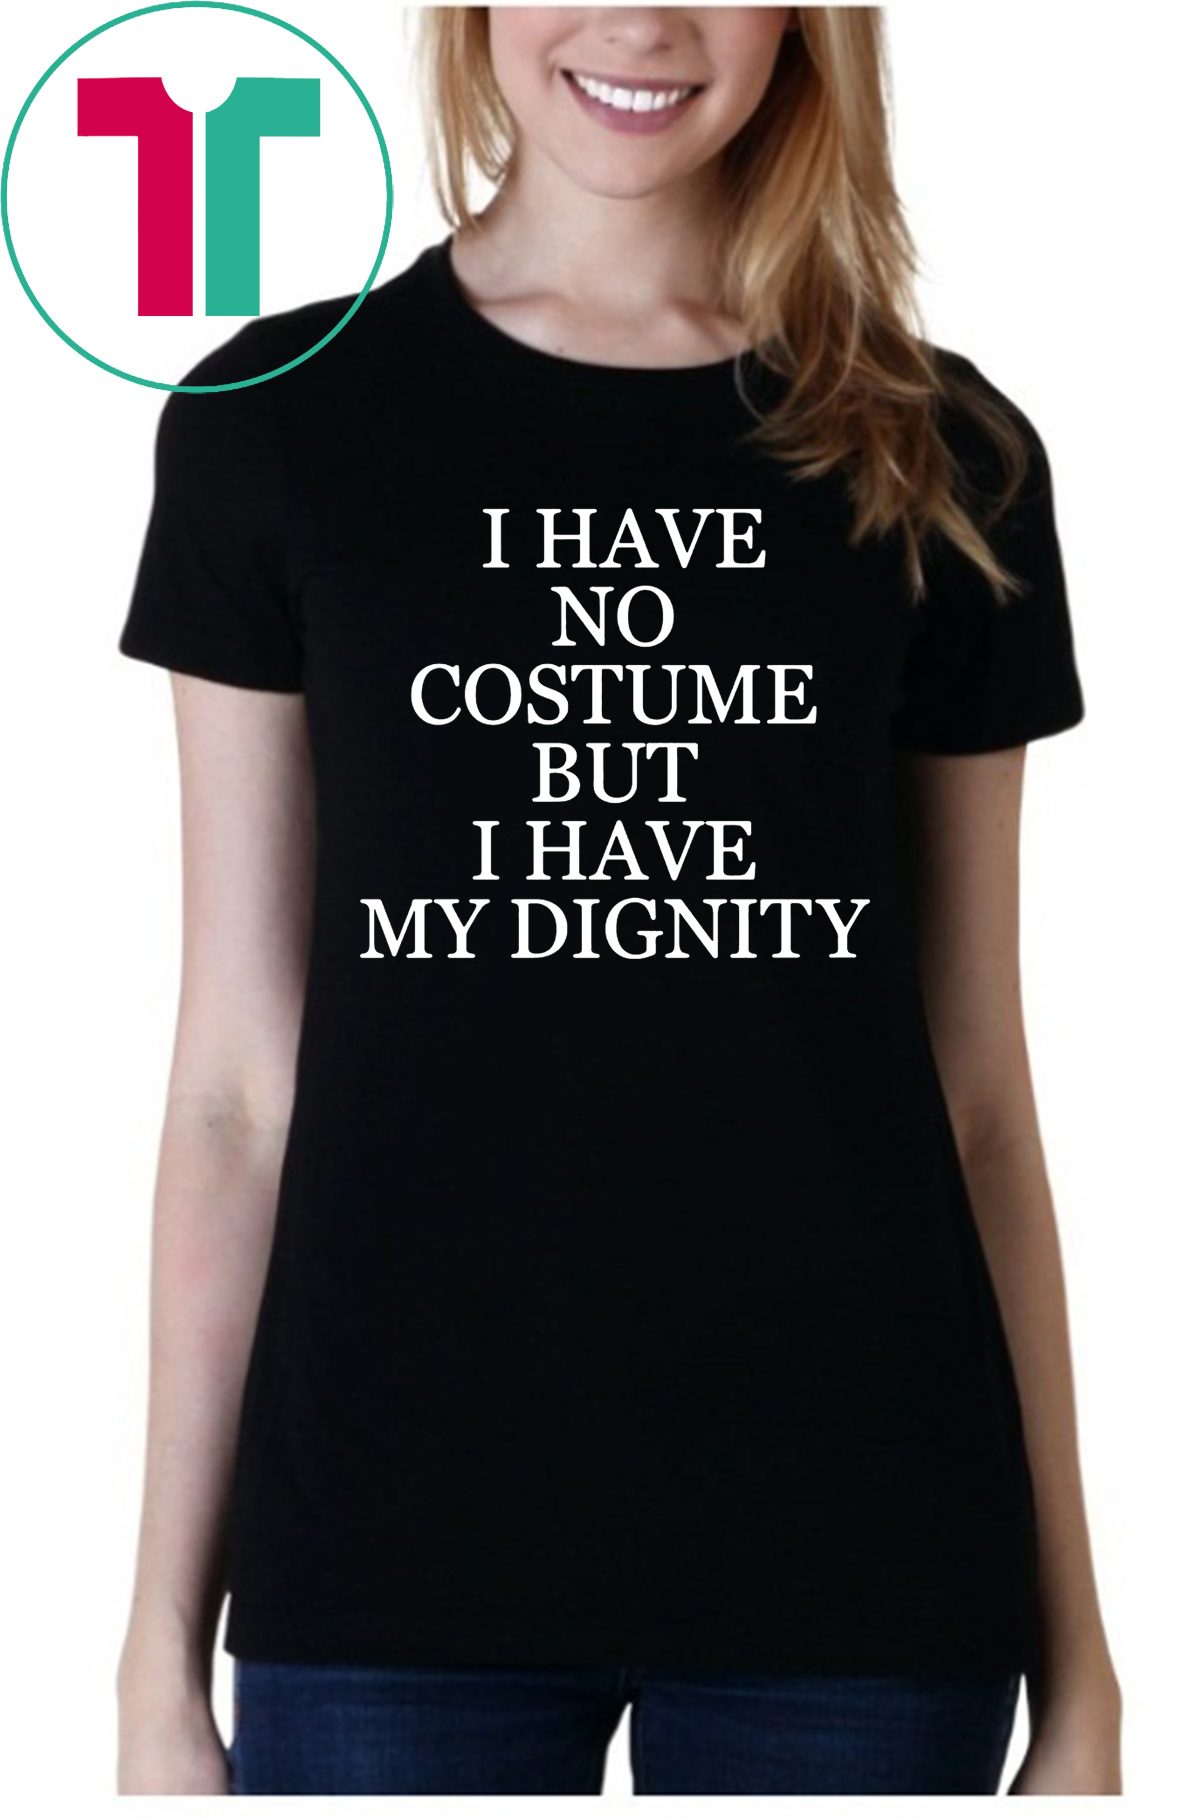 I HAVE NO COSTUME BUT I HAVE MY DIGNITY NICK JONAS T-SHIRT